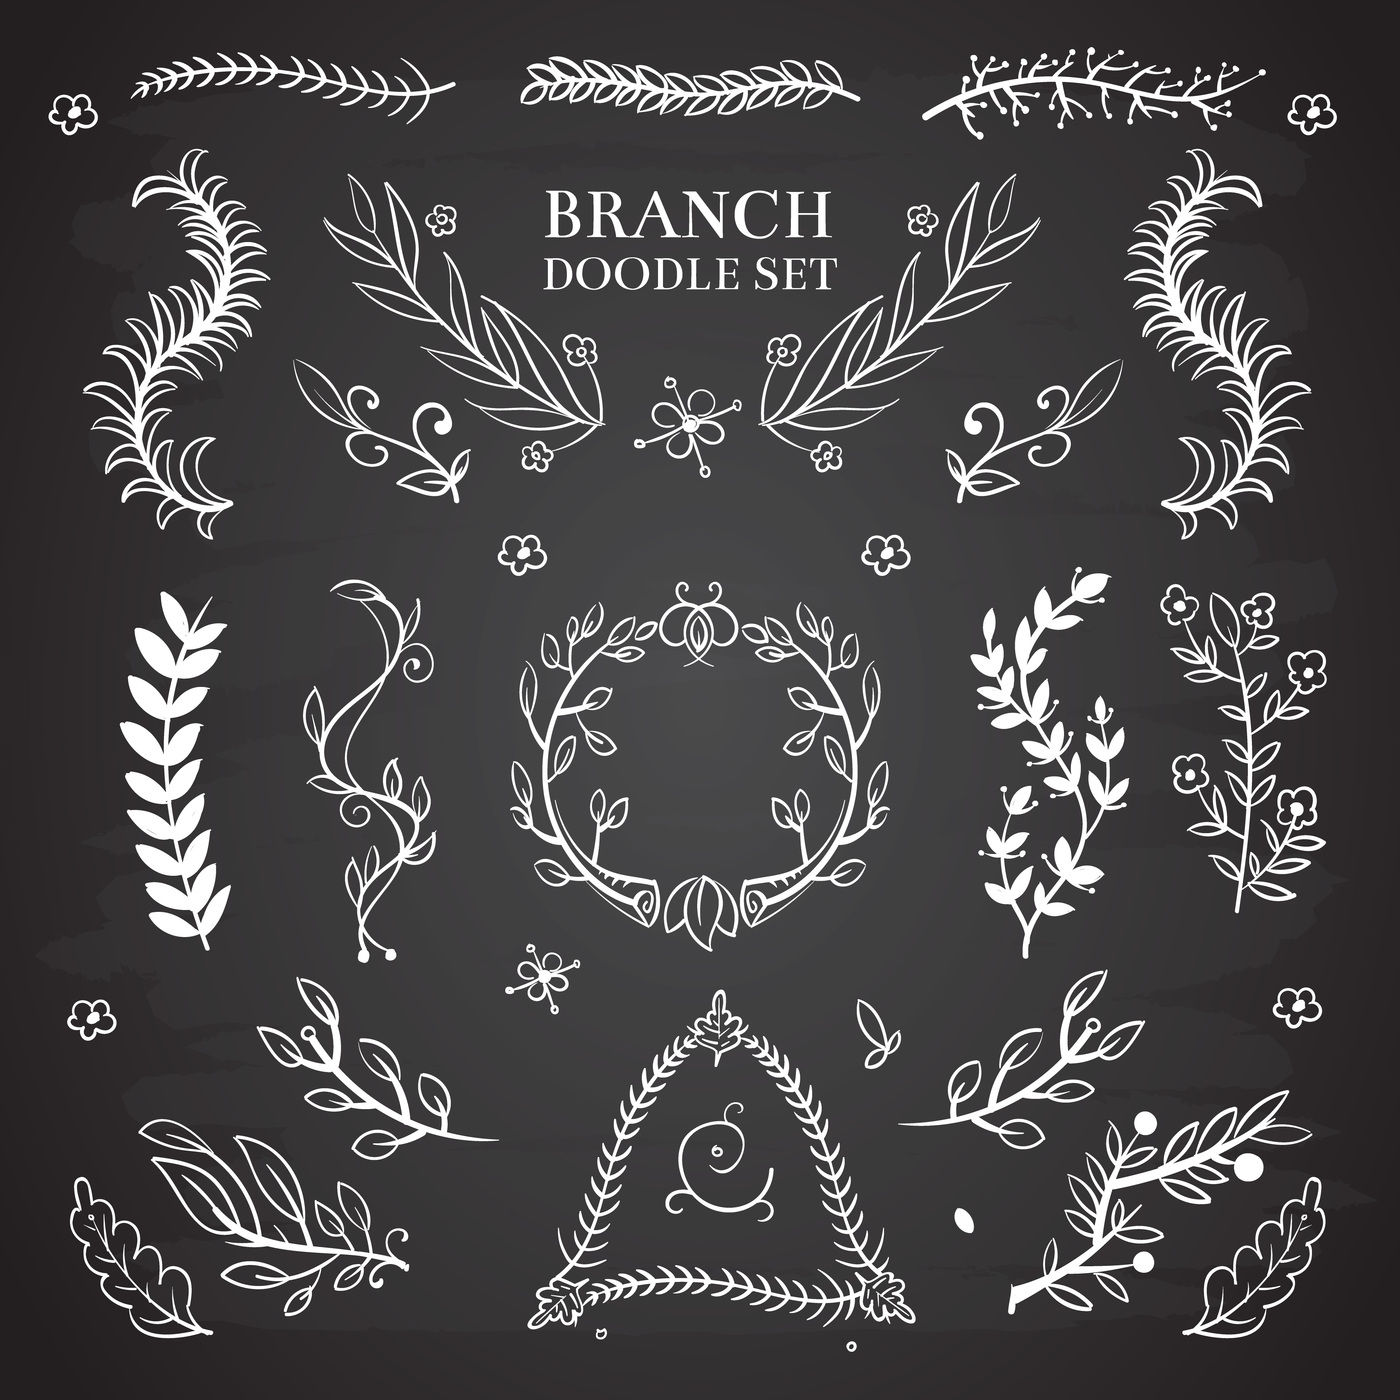 Nature Floral Vector Doodle Elements Vintage Wedding Branch Wreaths O By Microvector Thehungryjpeg Com